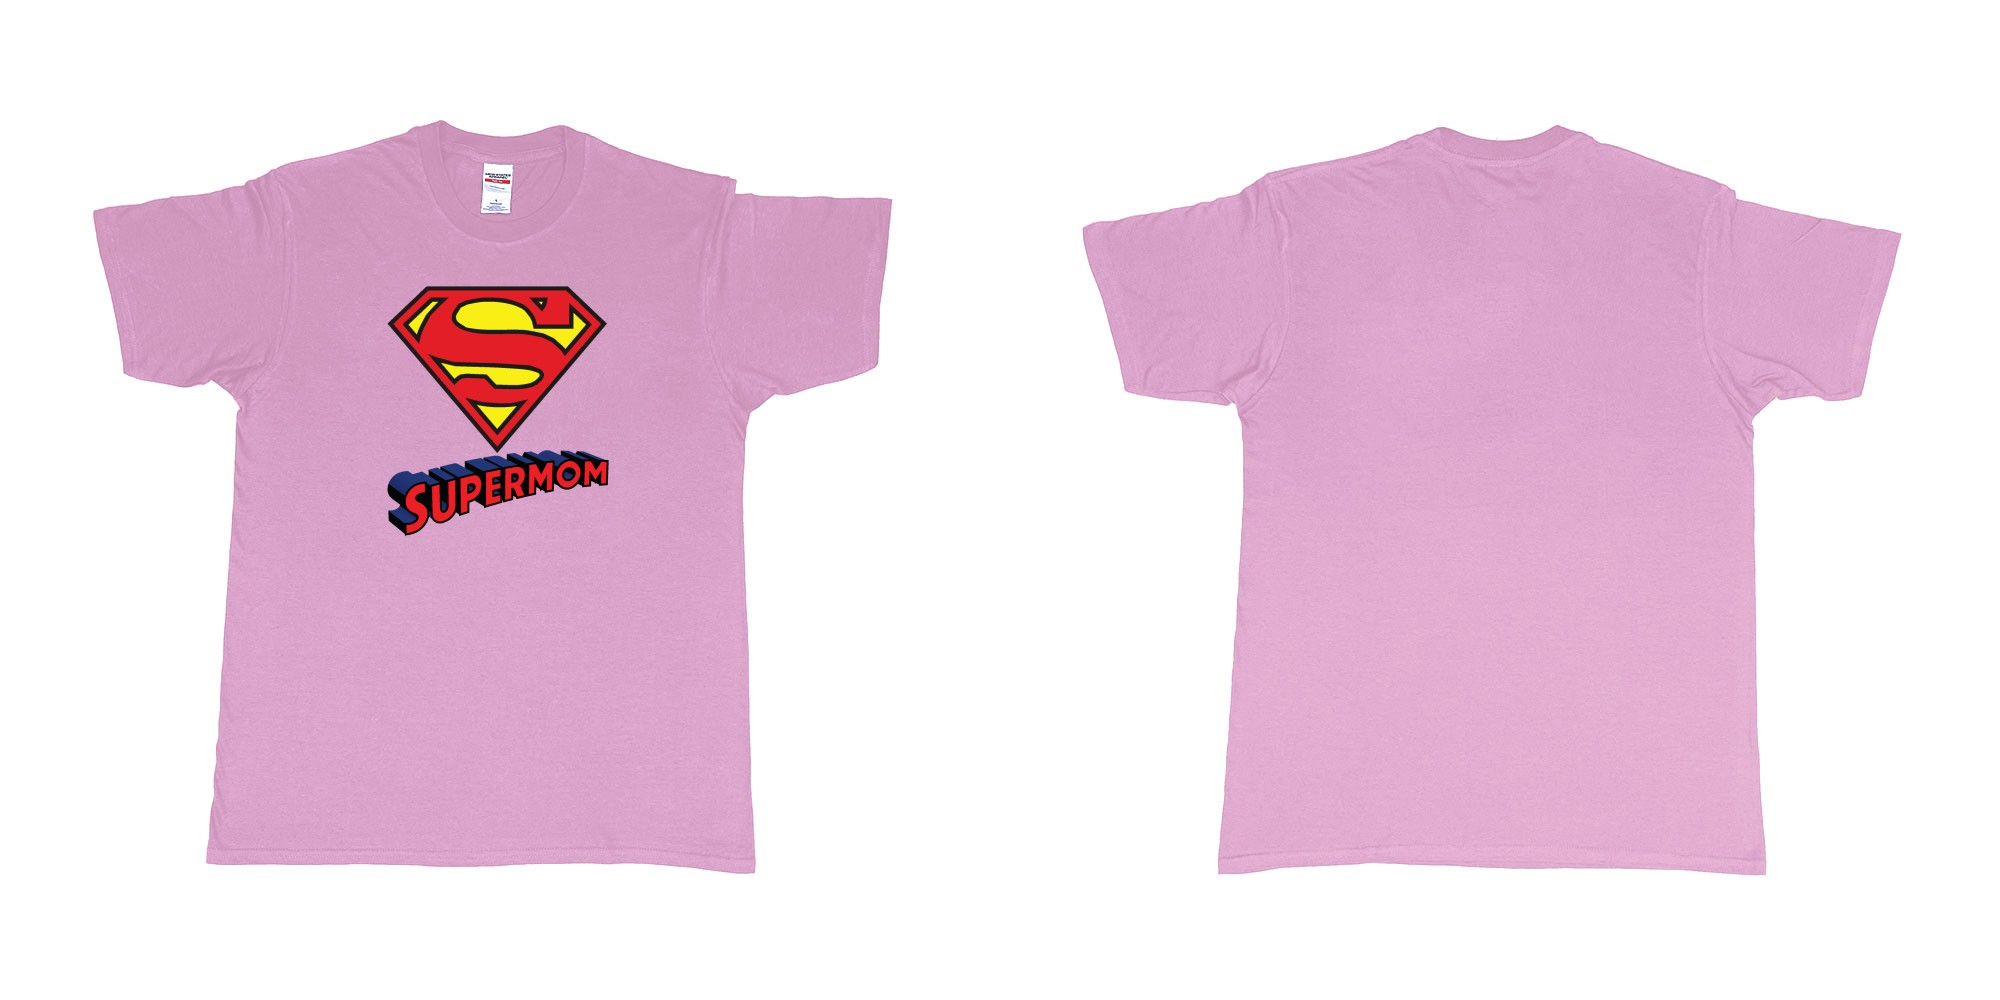 Custom tshirt design superman logo with own custom text print bali in fabric color light-pink choice your own text made in Bali by The Pirate Way